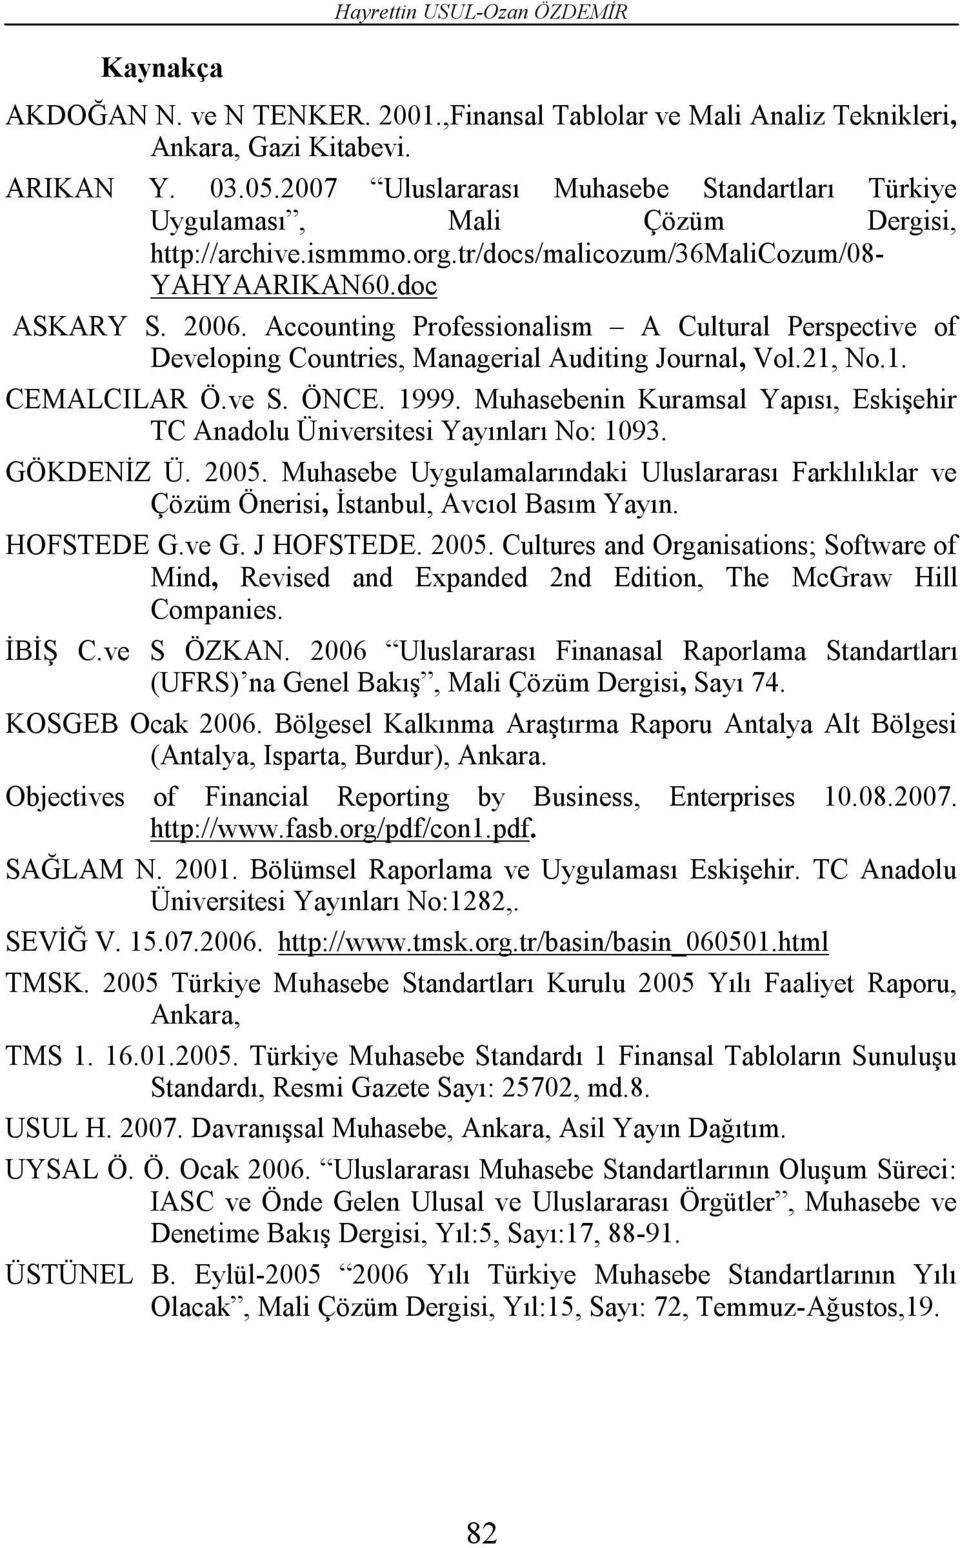 Accounting Professionalism A Cultural Perspective of Developing Countries, Managerial Auditing Journal, Vol.21, No.1. CEMALCILAR Ö.ve S. ÖNCE. 1999.